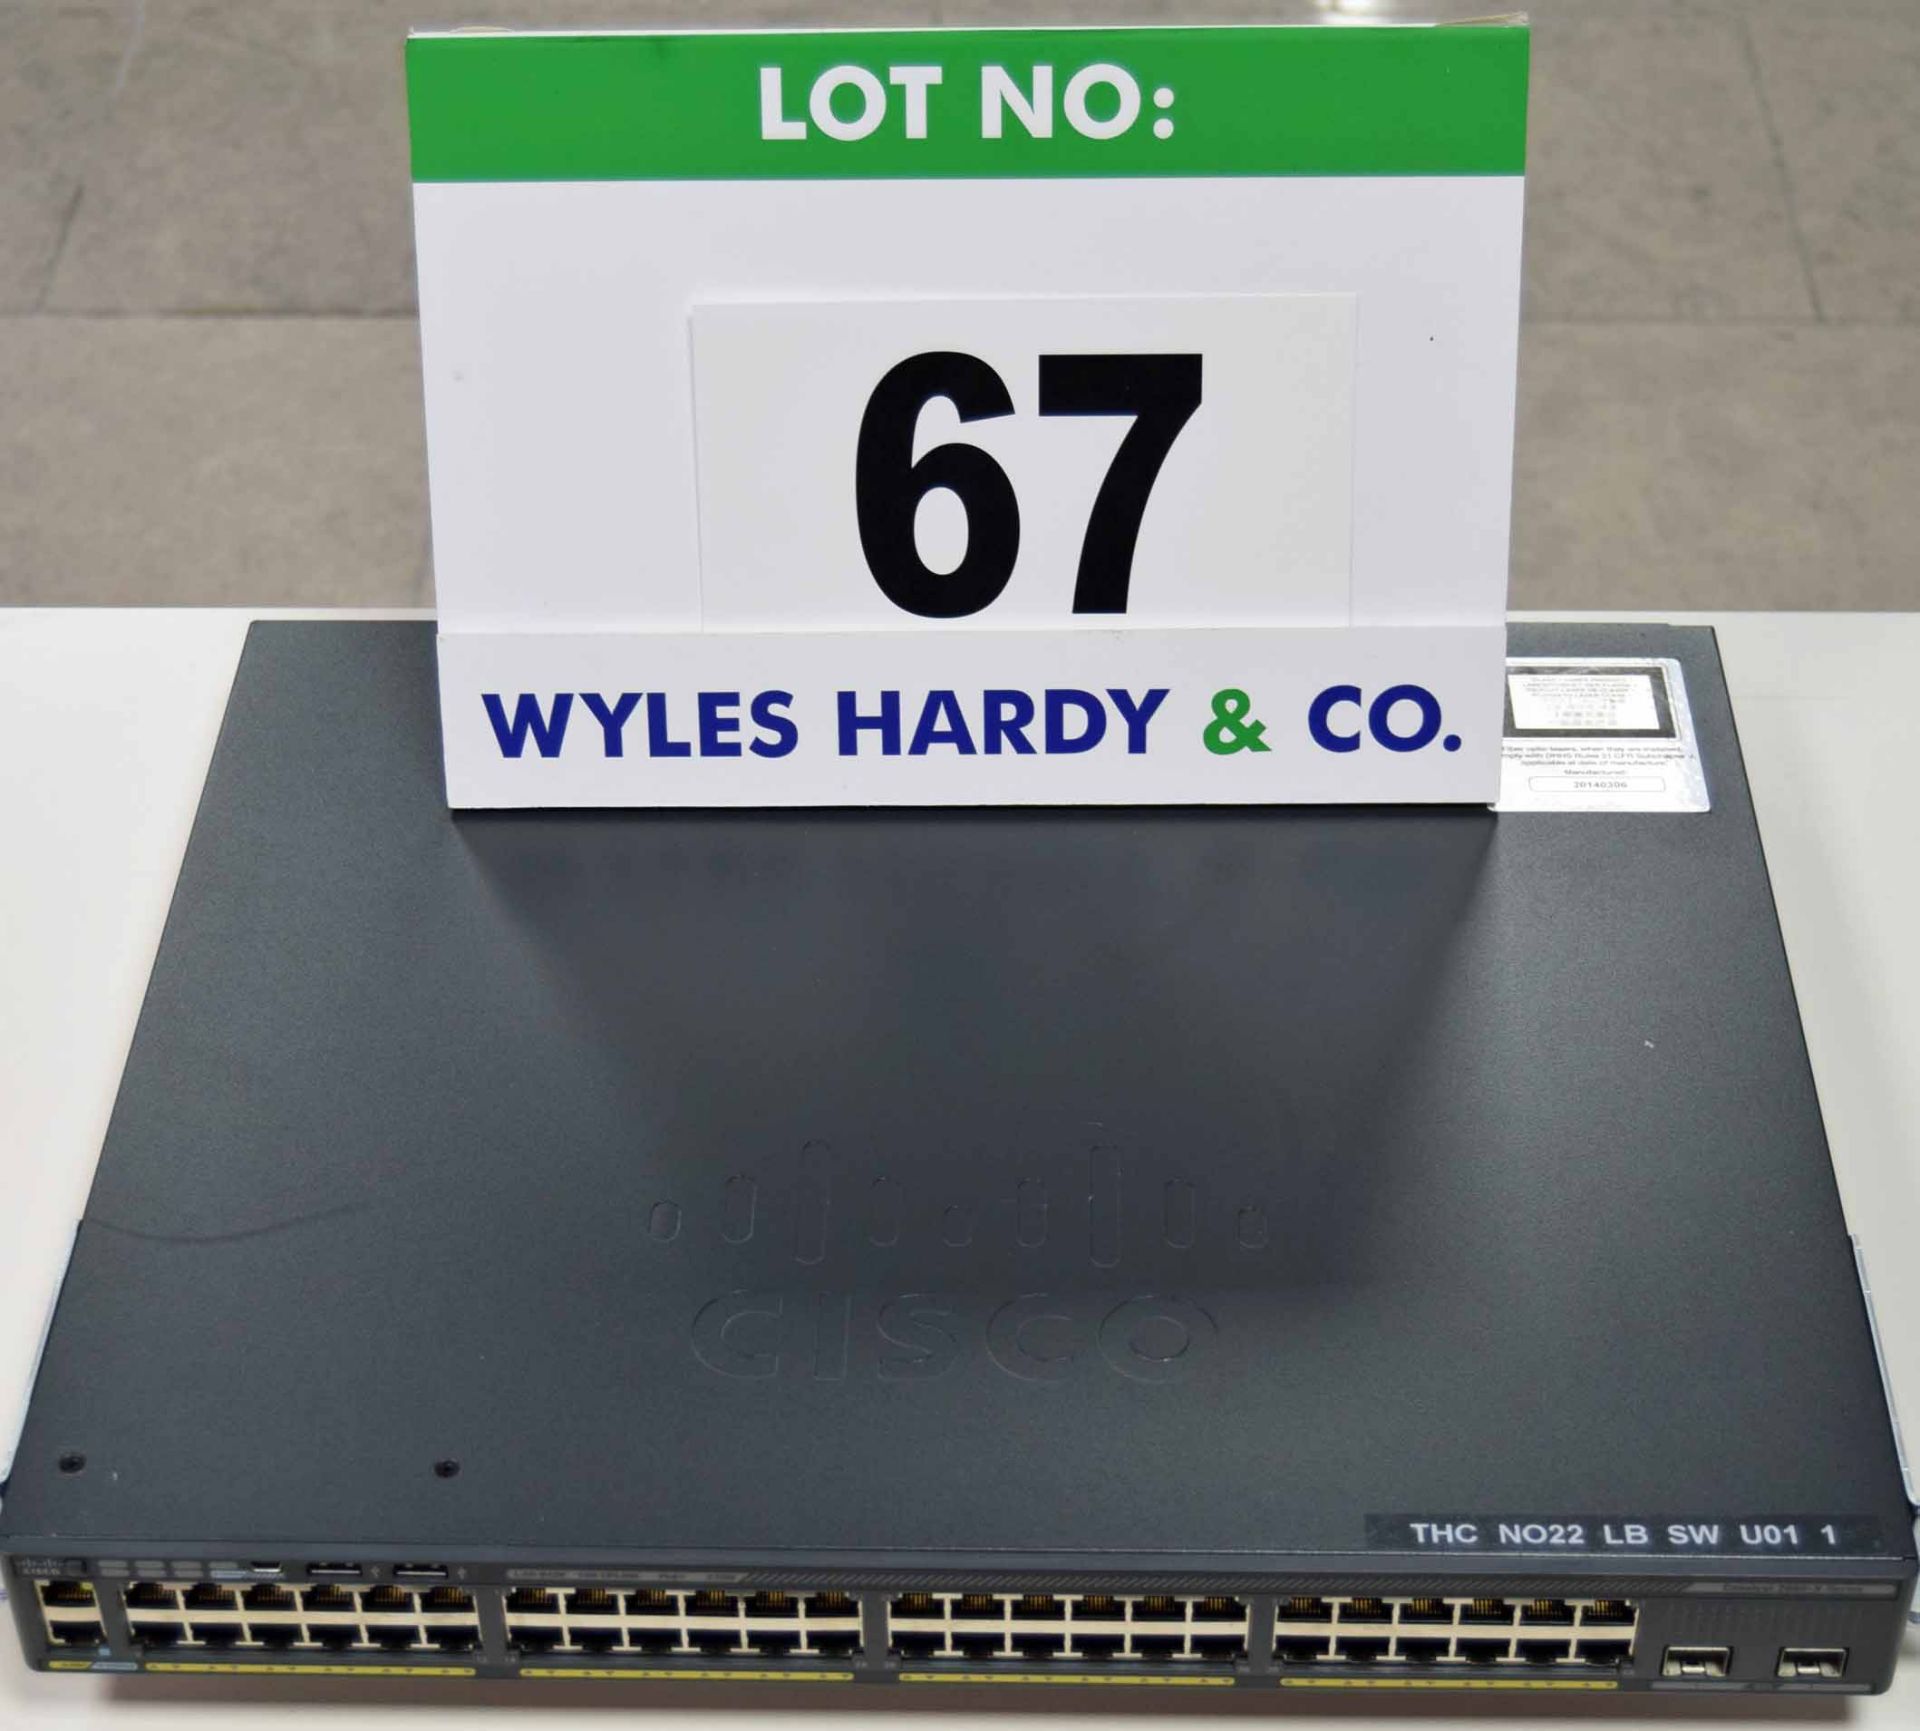 A CISCO Catalyst 2960-X Series Model WS-C2960X-48LPD-L 48-Port plus 2 Rack mounted Network Switches